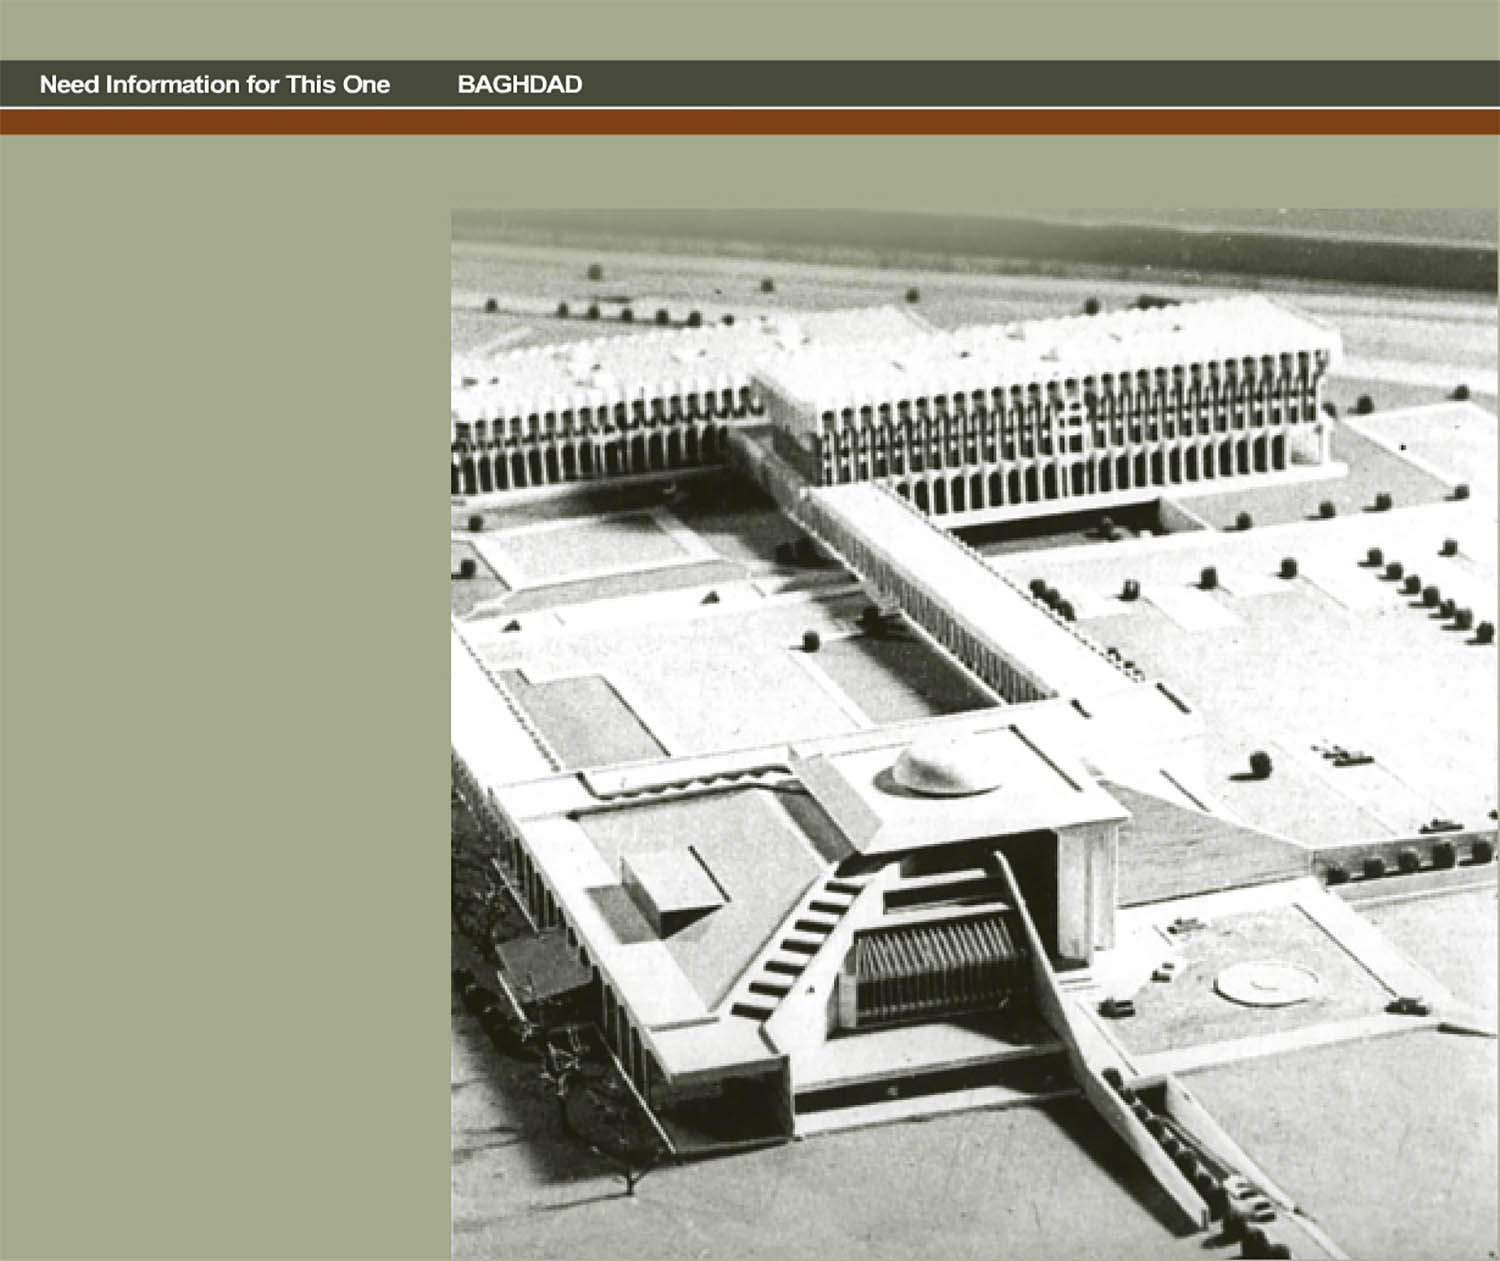 Digital image from the online portfolio of Hisham Munir and Associates, featuring an aerial image of the model designed for the National Agriculture Museum.